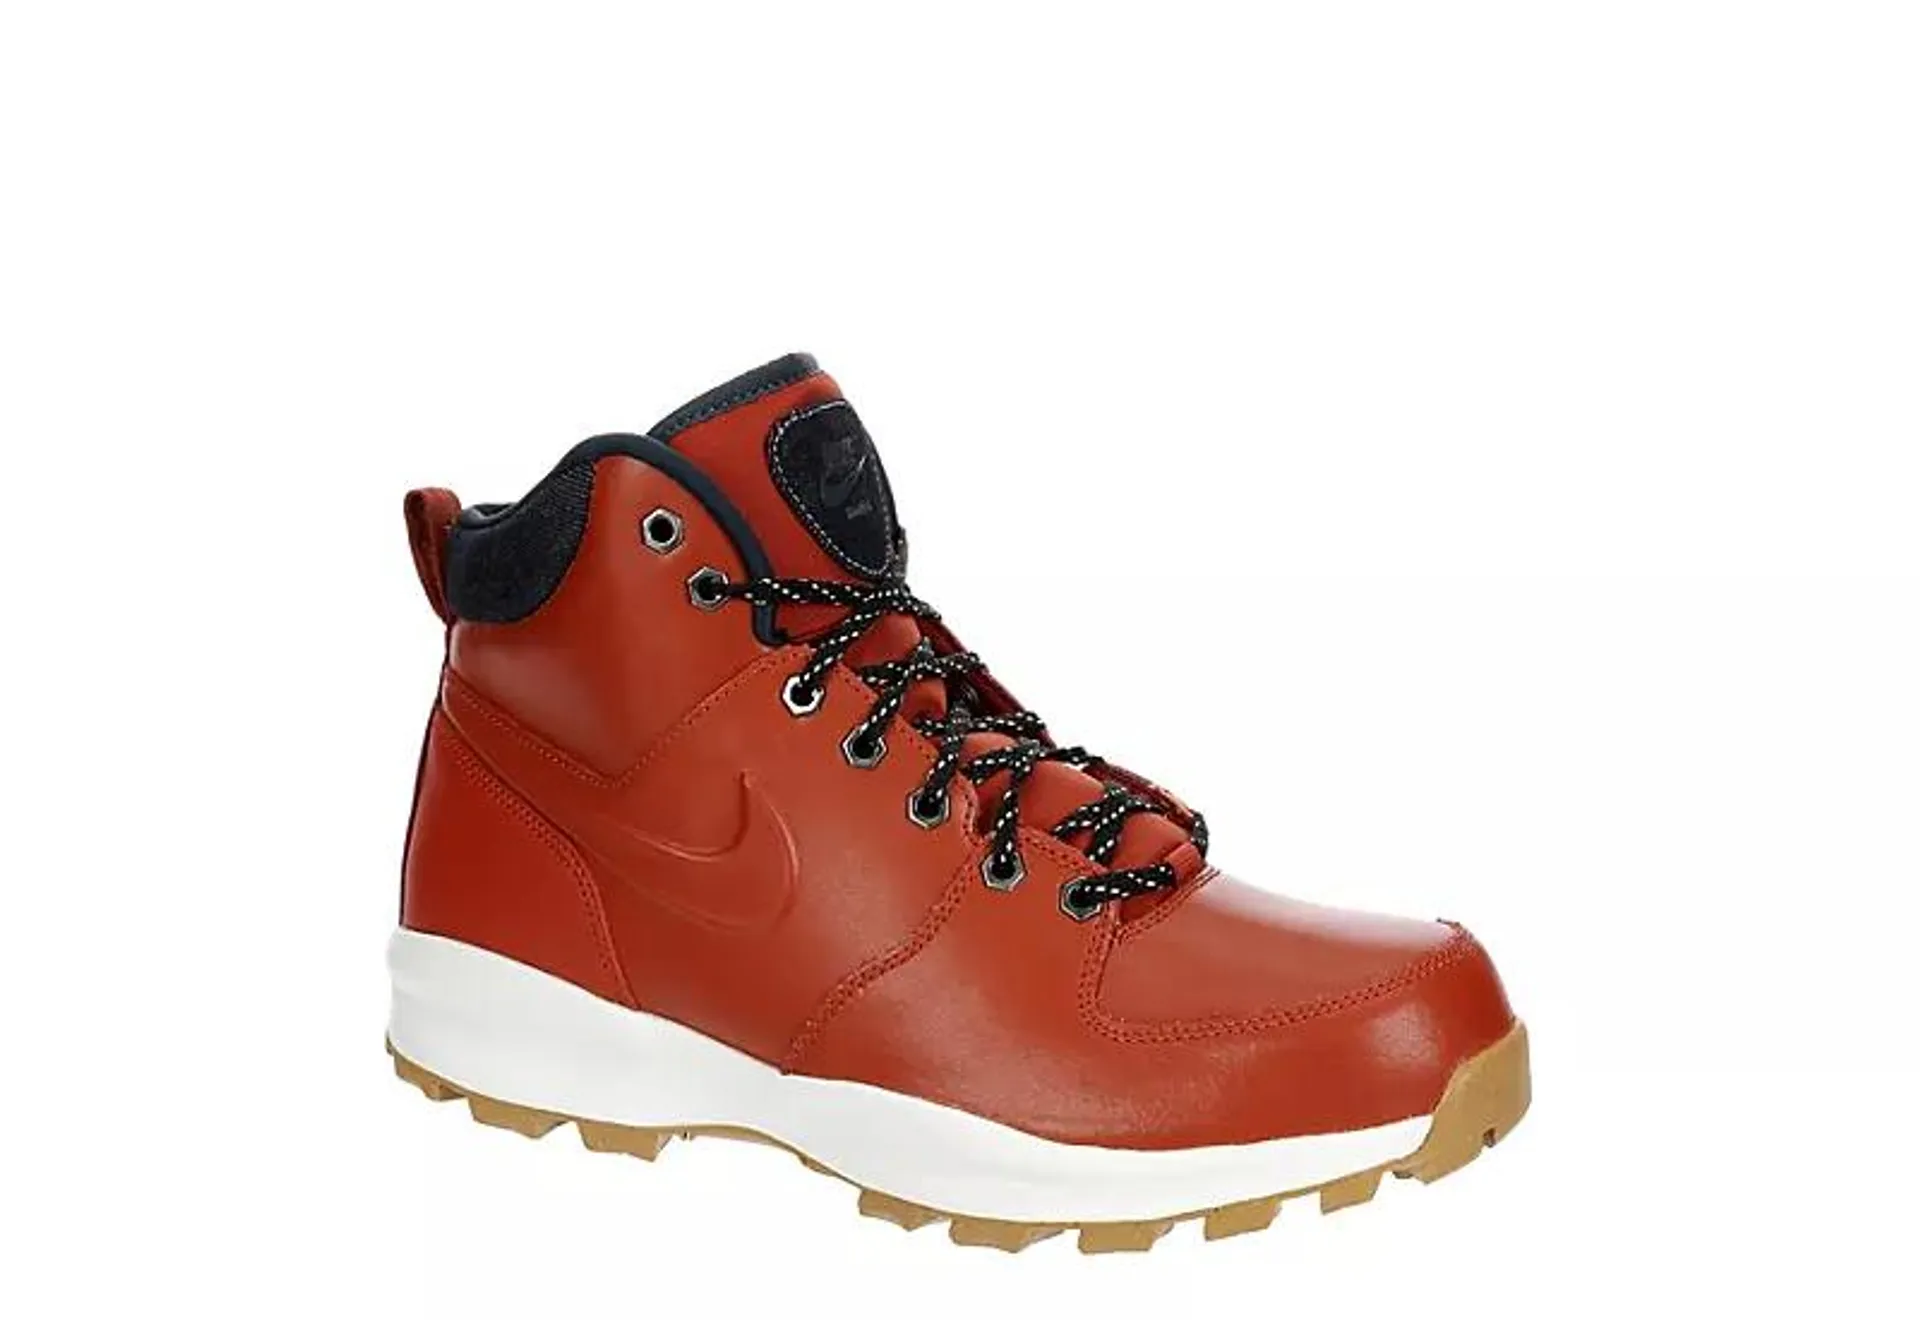 Nike Mens Manoa Lace-up Boot - Rust